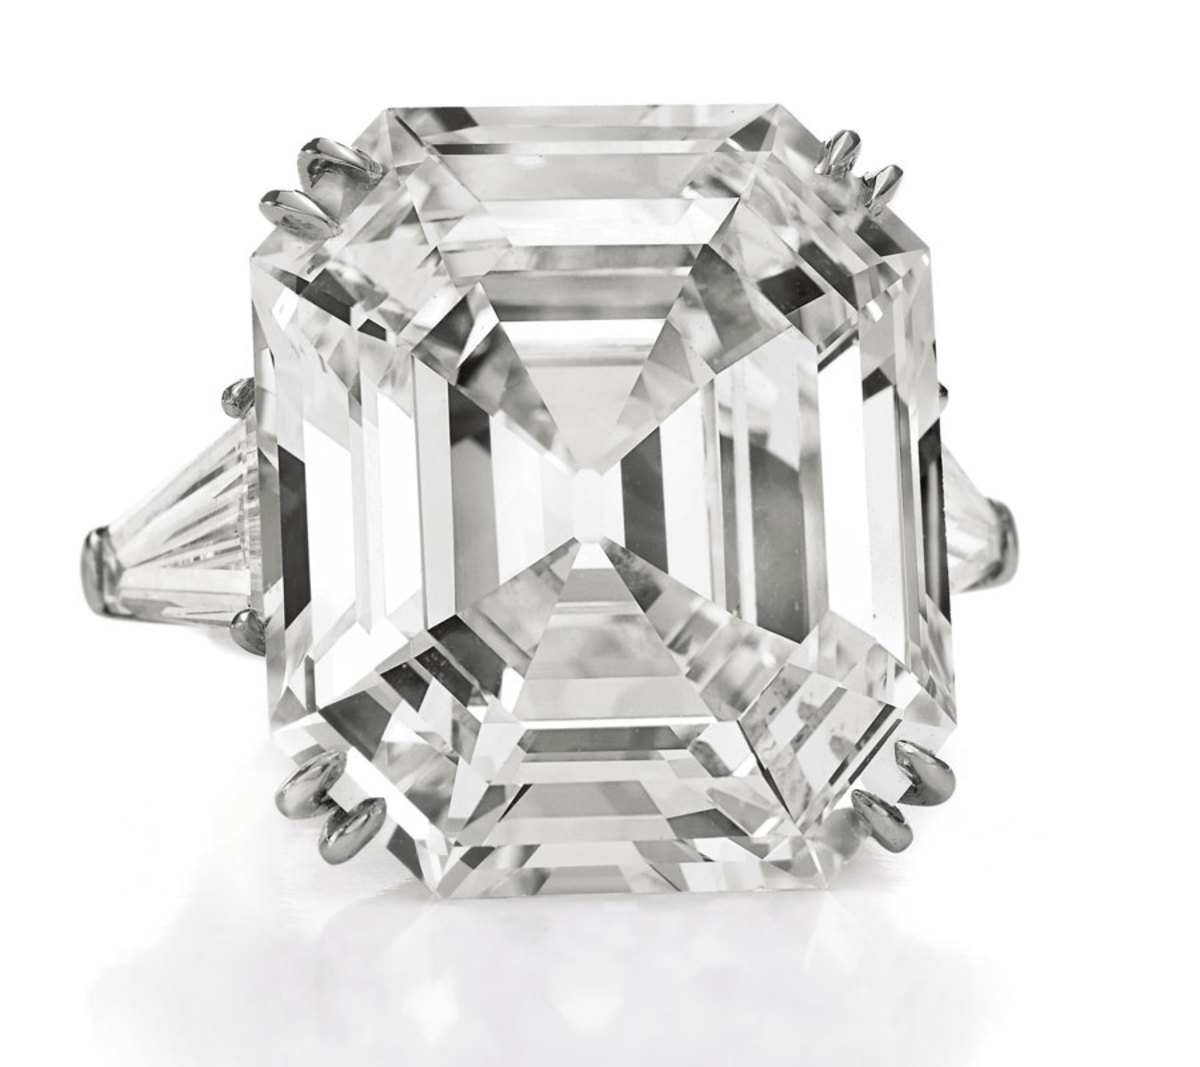 Set with a cut-cornered rectangular-cut diamond, the Elizabeth Taylor Diamond Ring weighs 33.19 carats and is flanked on either side by a tapered baguette-cut diamond, mounted in platinum. This sold for $8.8 million.